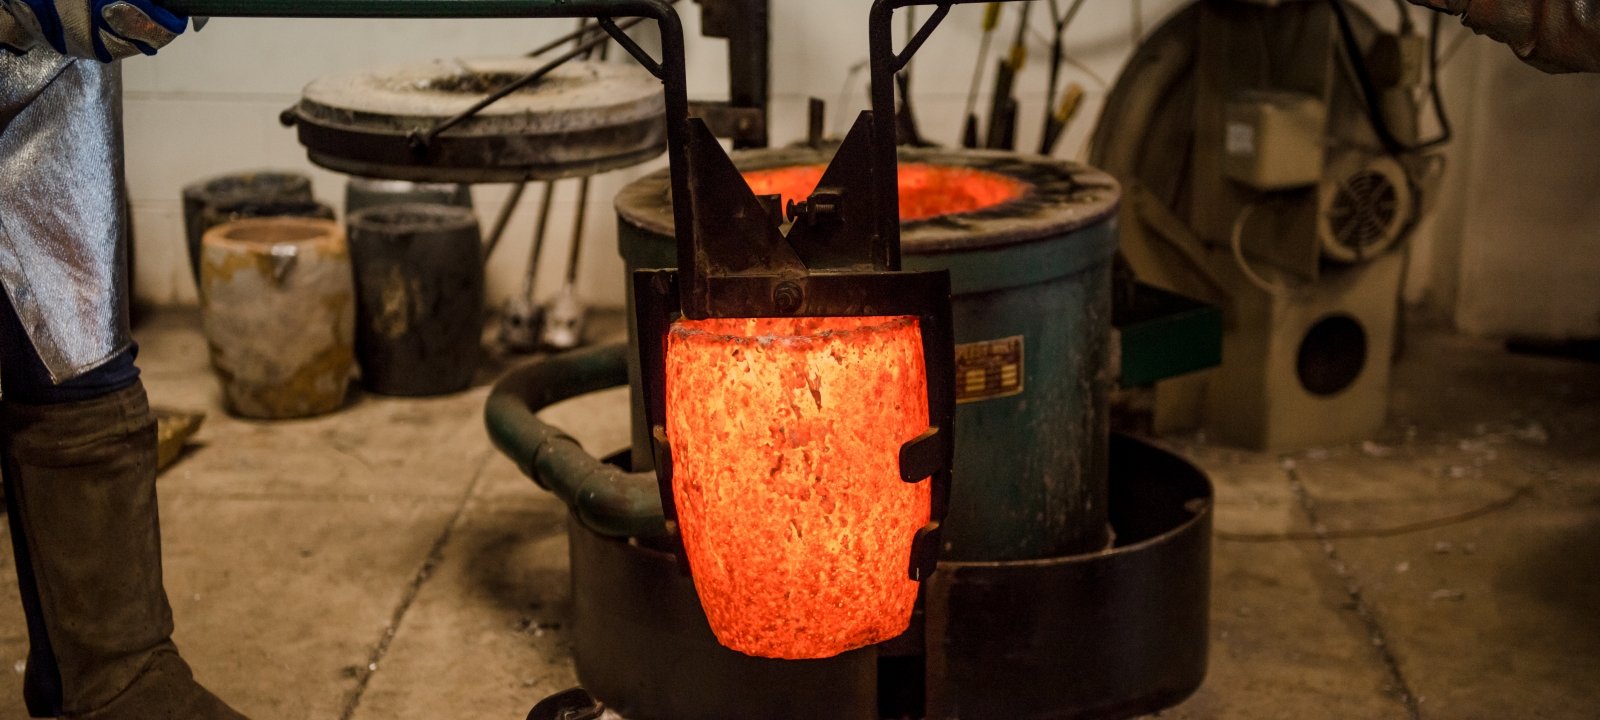 Students working in the foundry, pouring hot material into a mold.